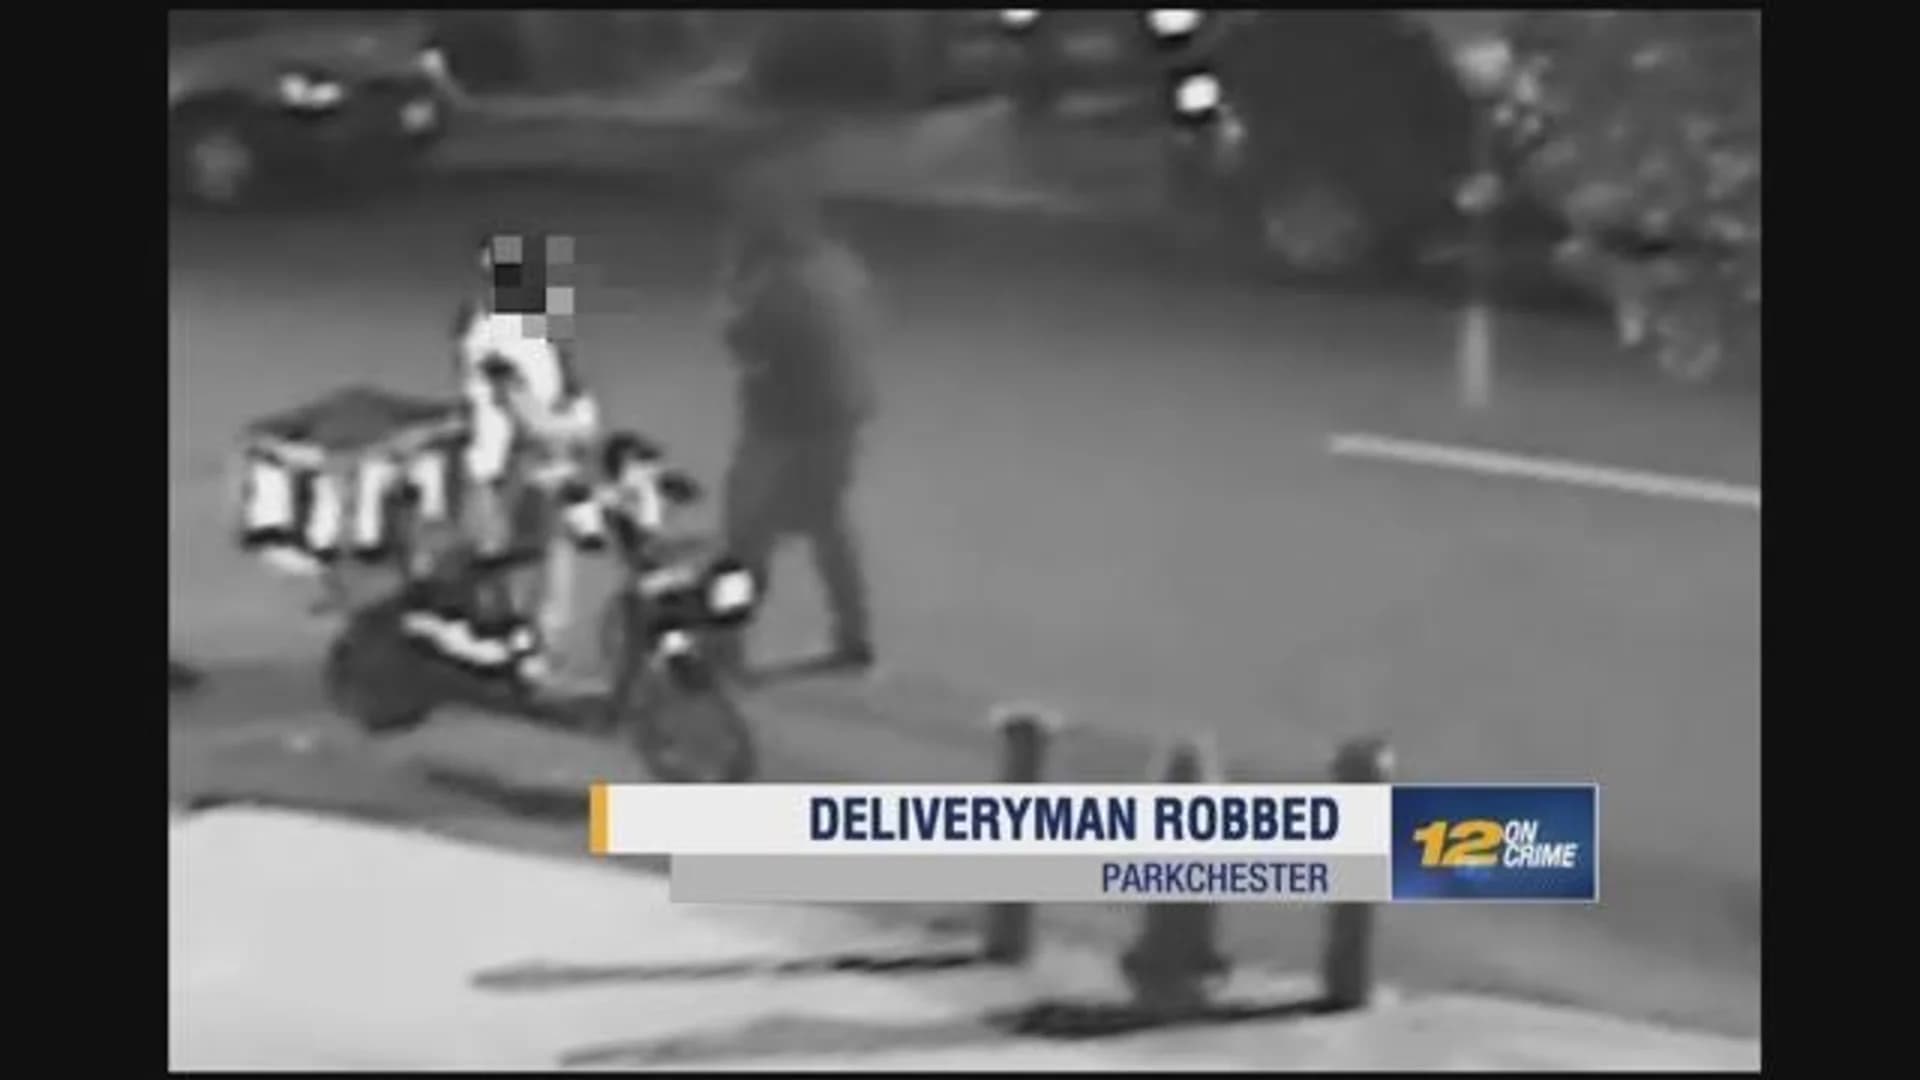 2 accused of attacking, robbing food deliveryman in Parkchester